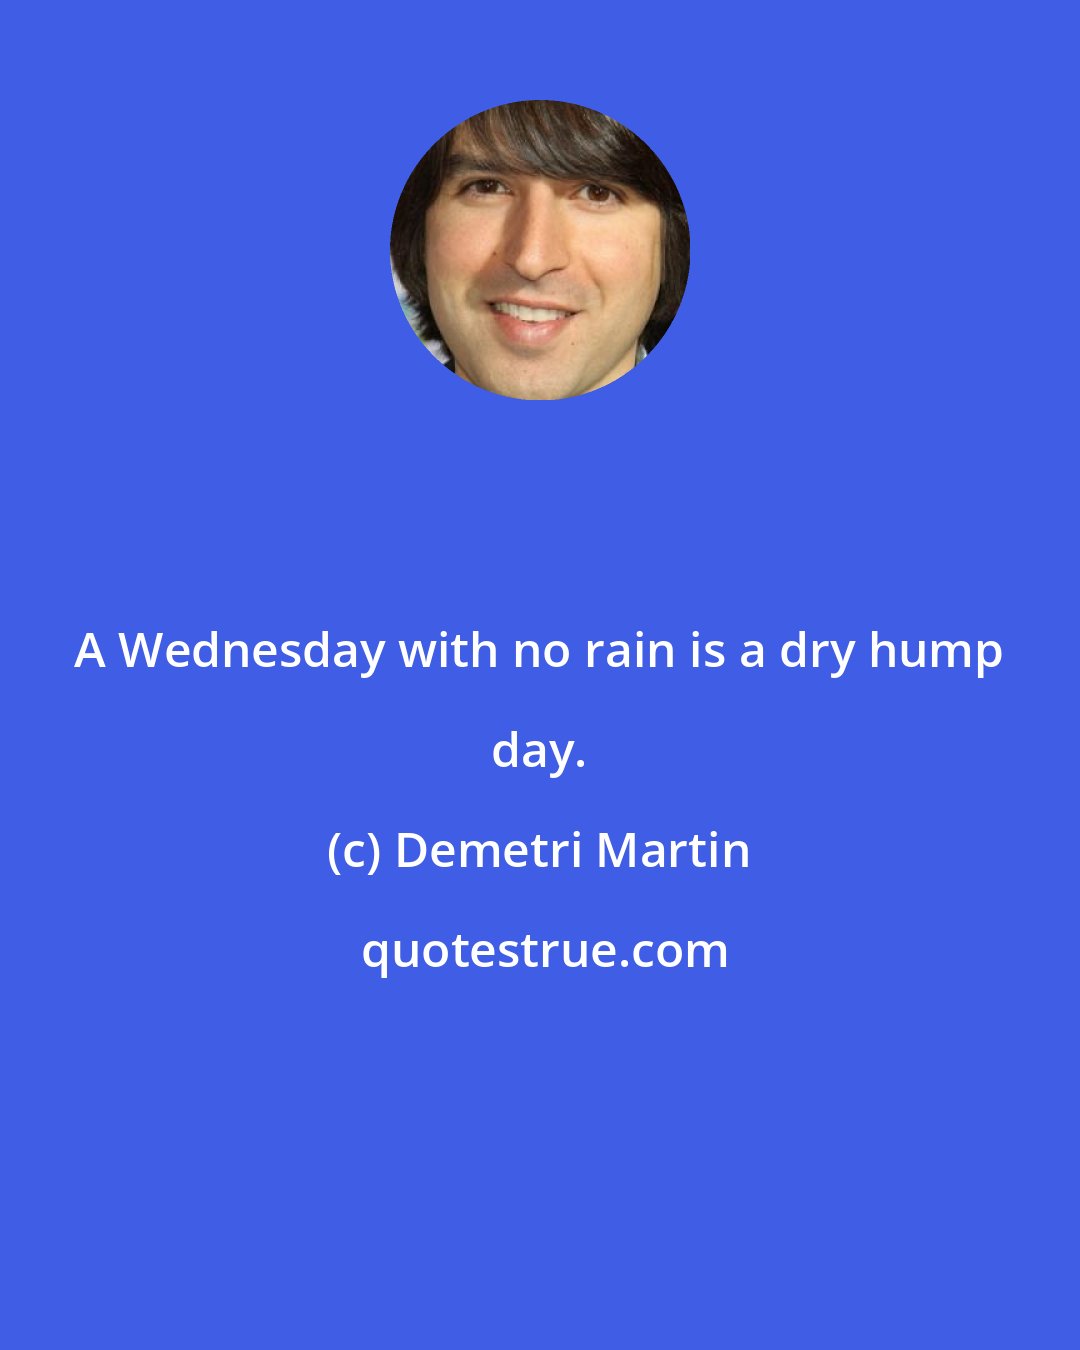 Demetri Martin: A Wednesday with no rain is a dry hump day.